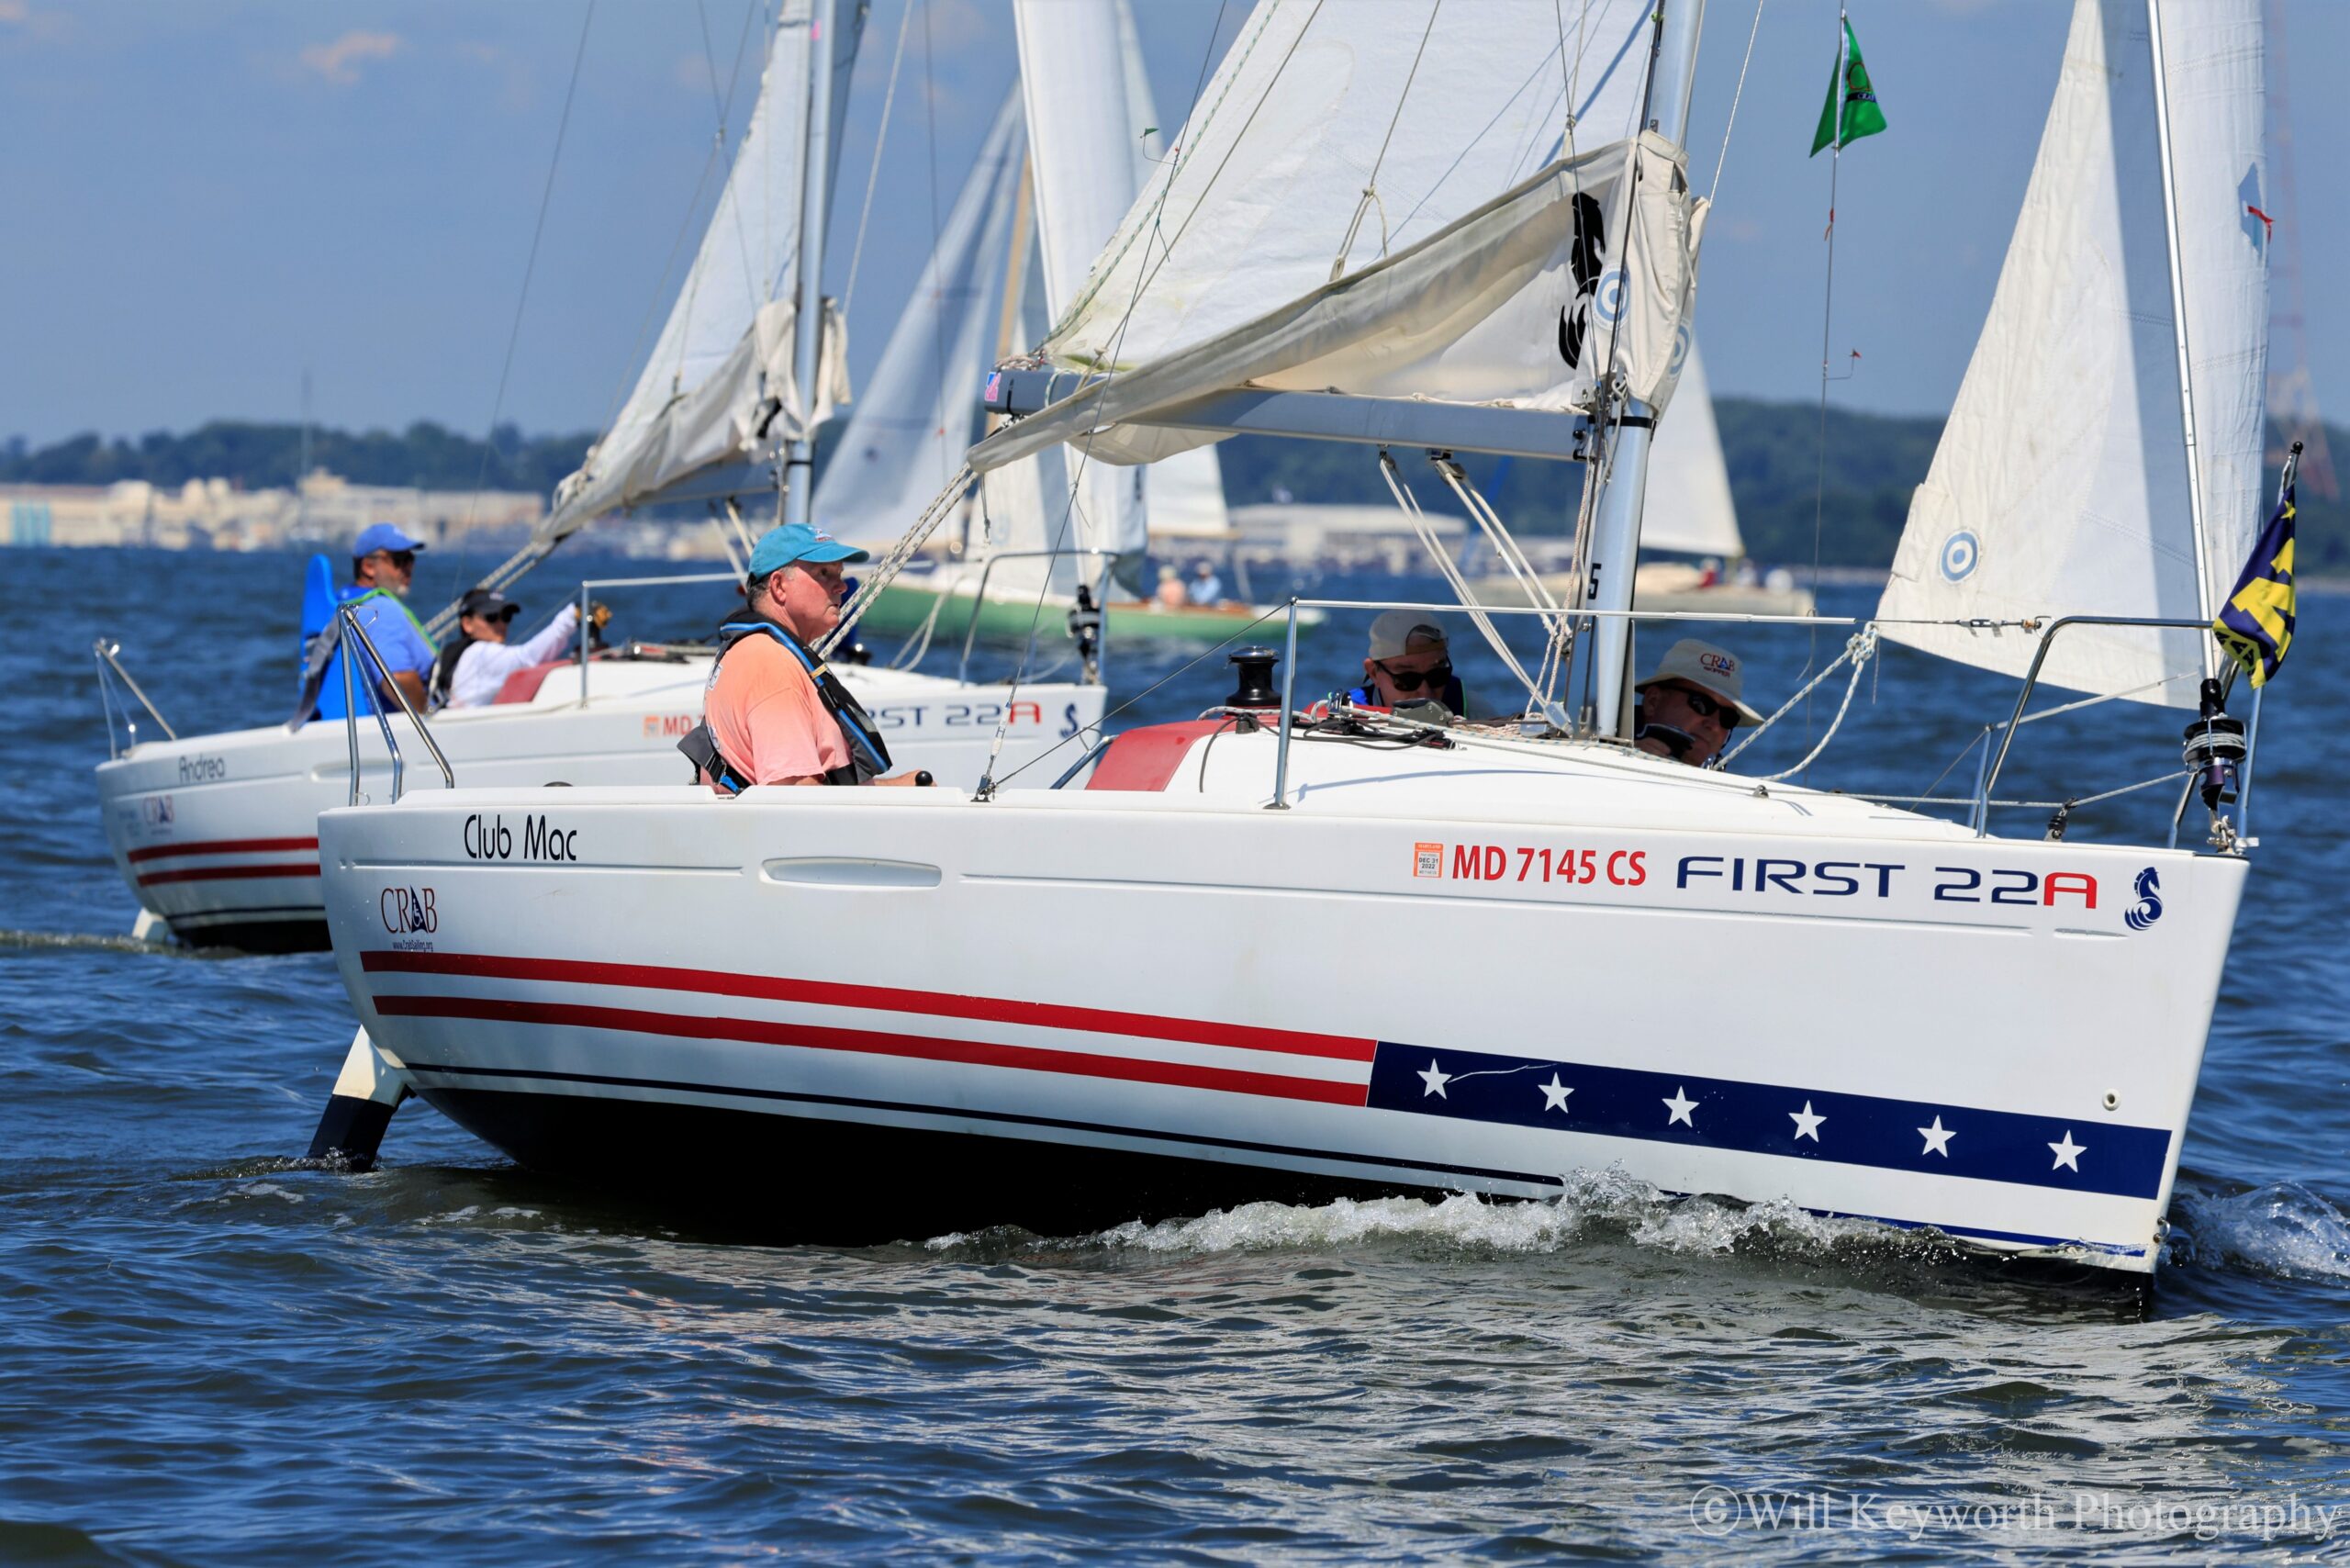 A photo of two of CRAB's 6 Beneteau First 22As (A for Adaptive) sailboats on the water. 